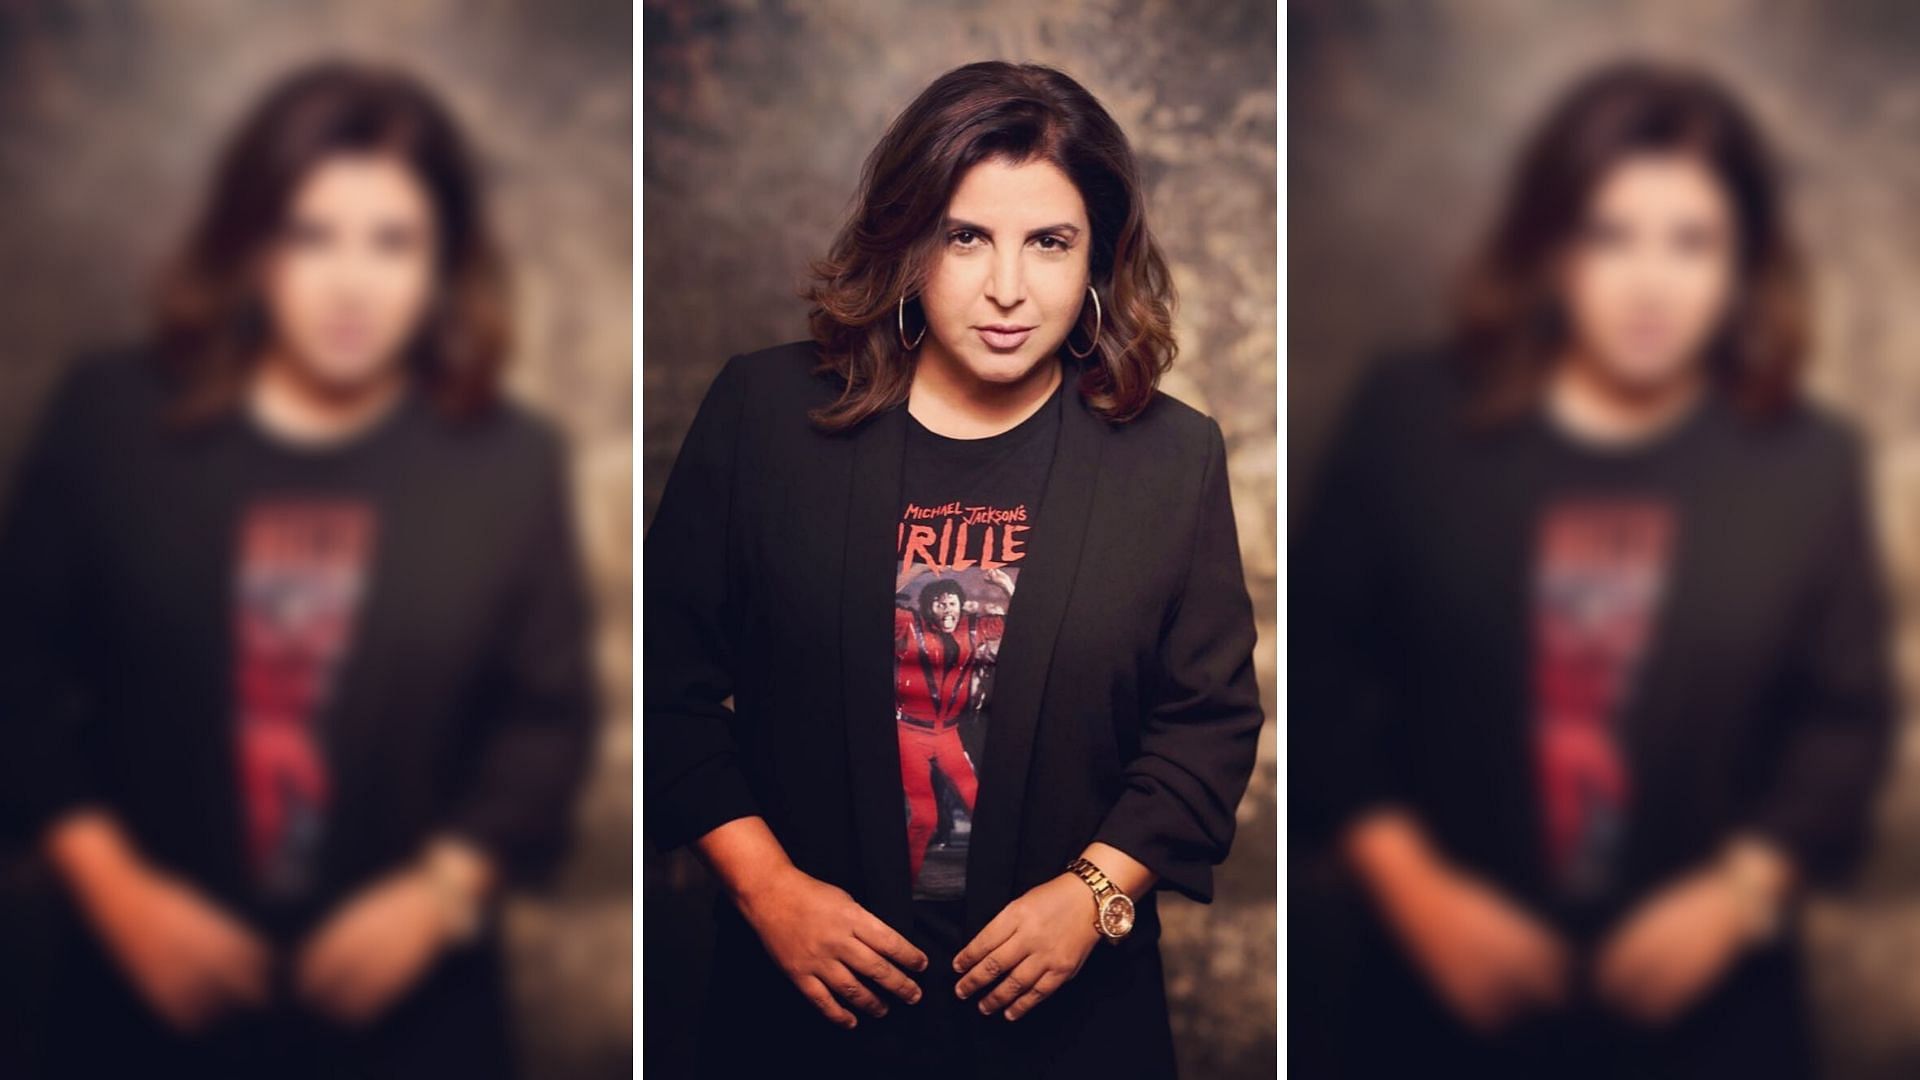 Farah Khan says her Twitter and Instagram accounts were hacked.